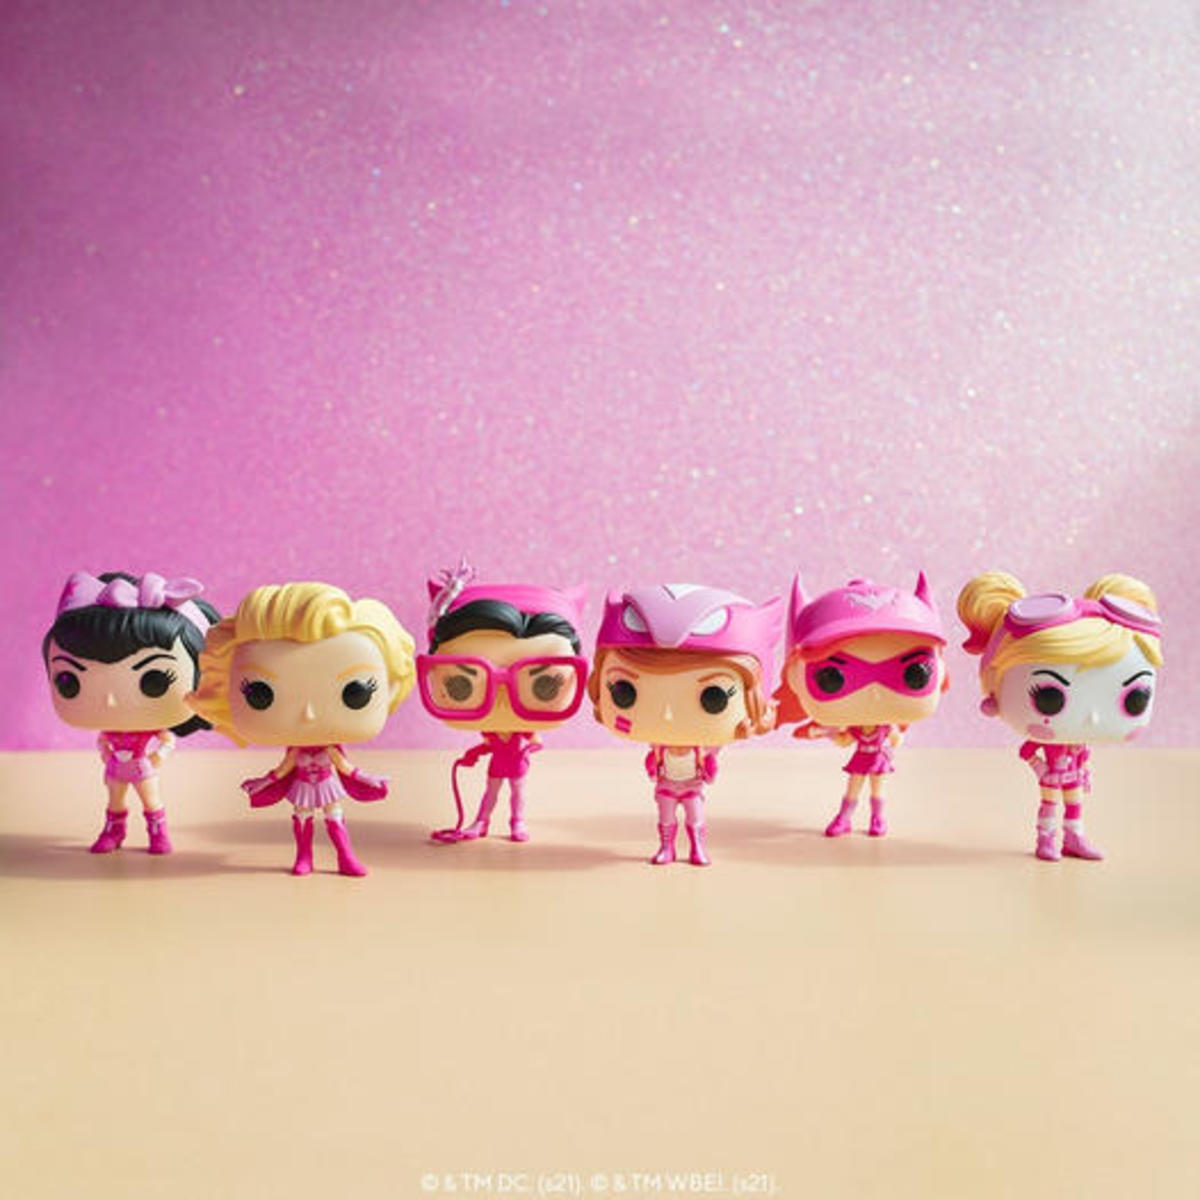 Harley Quinn and the Pink Bombshells